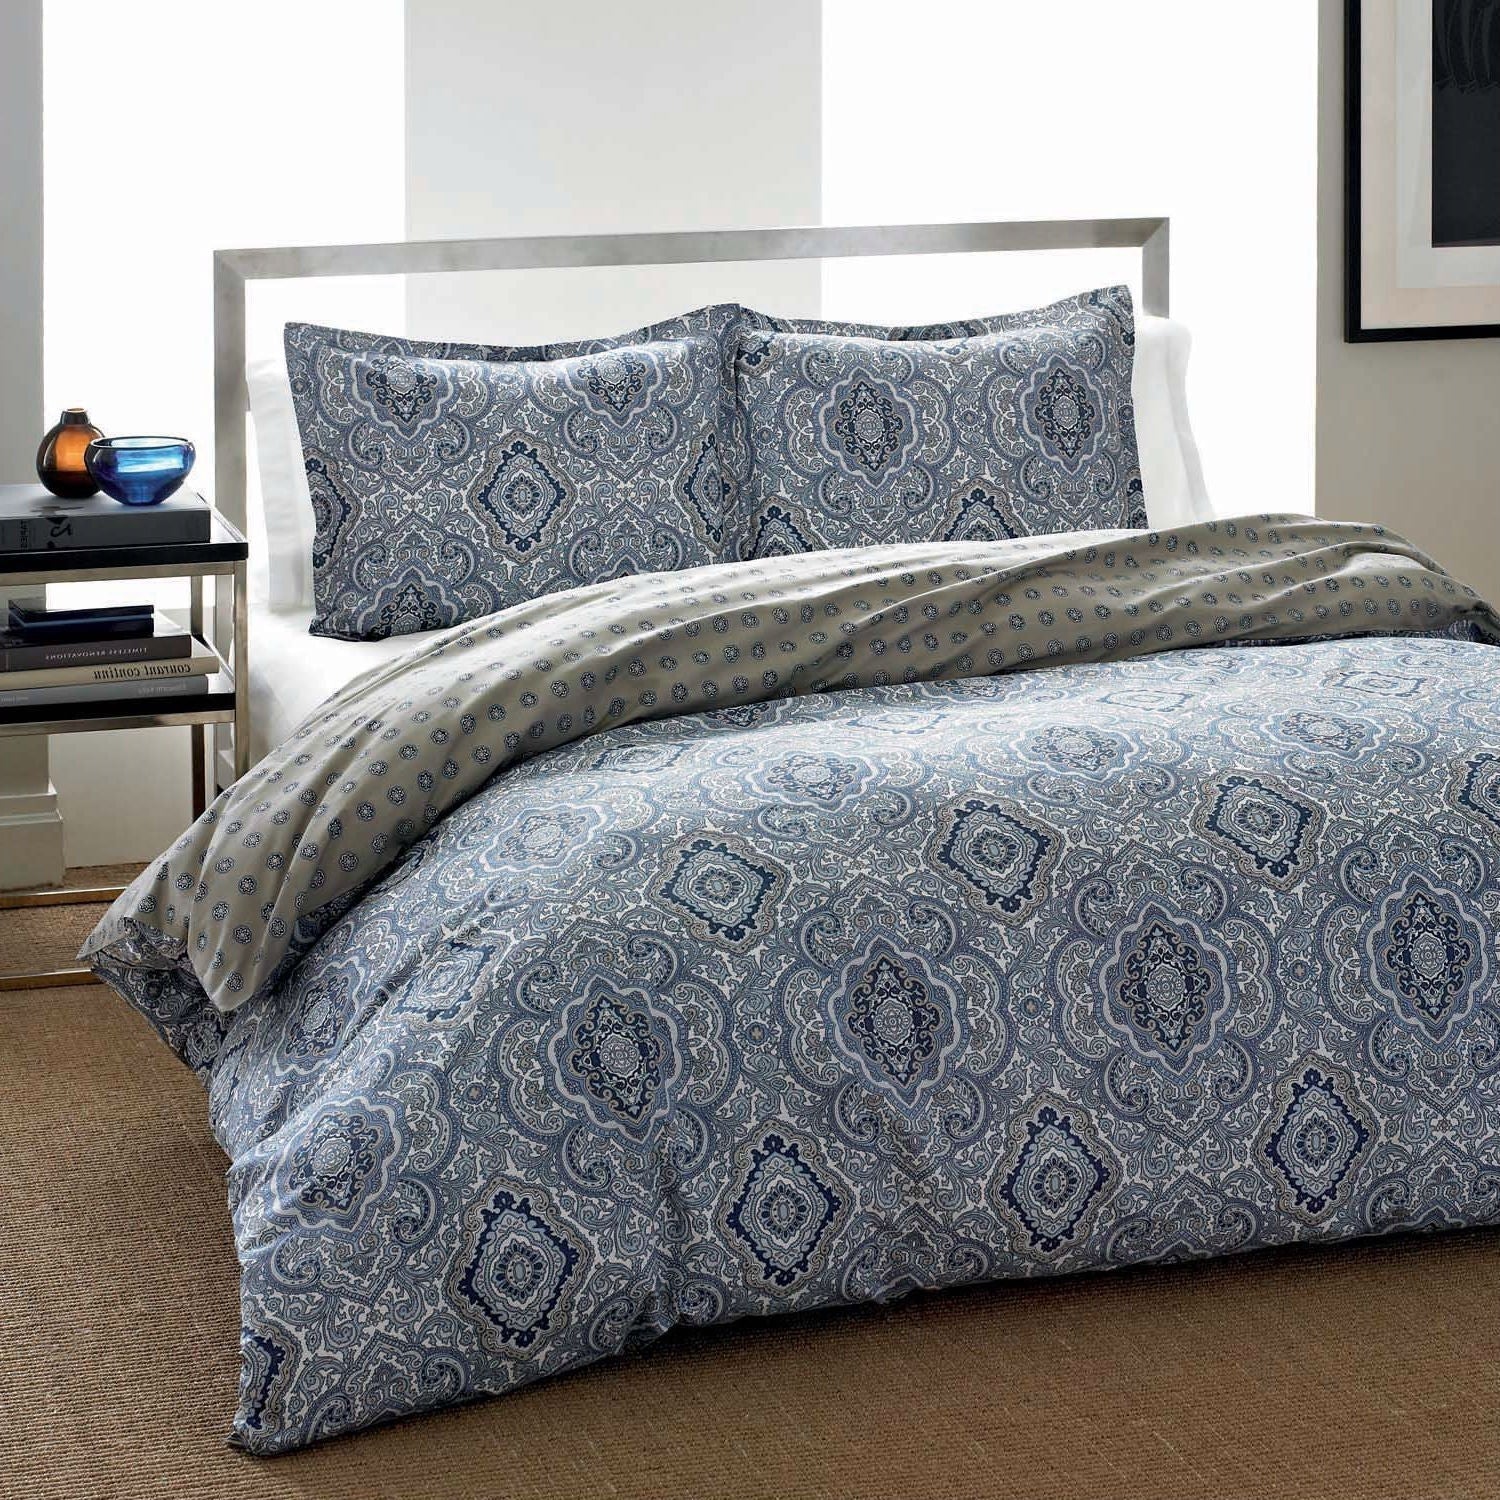 Bedroom > Comforters And Sets - Full / Queen Cotton Comforter Set With Grey Blue Damask Pattern